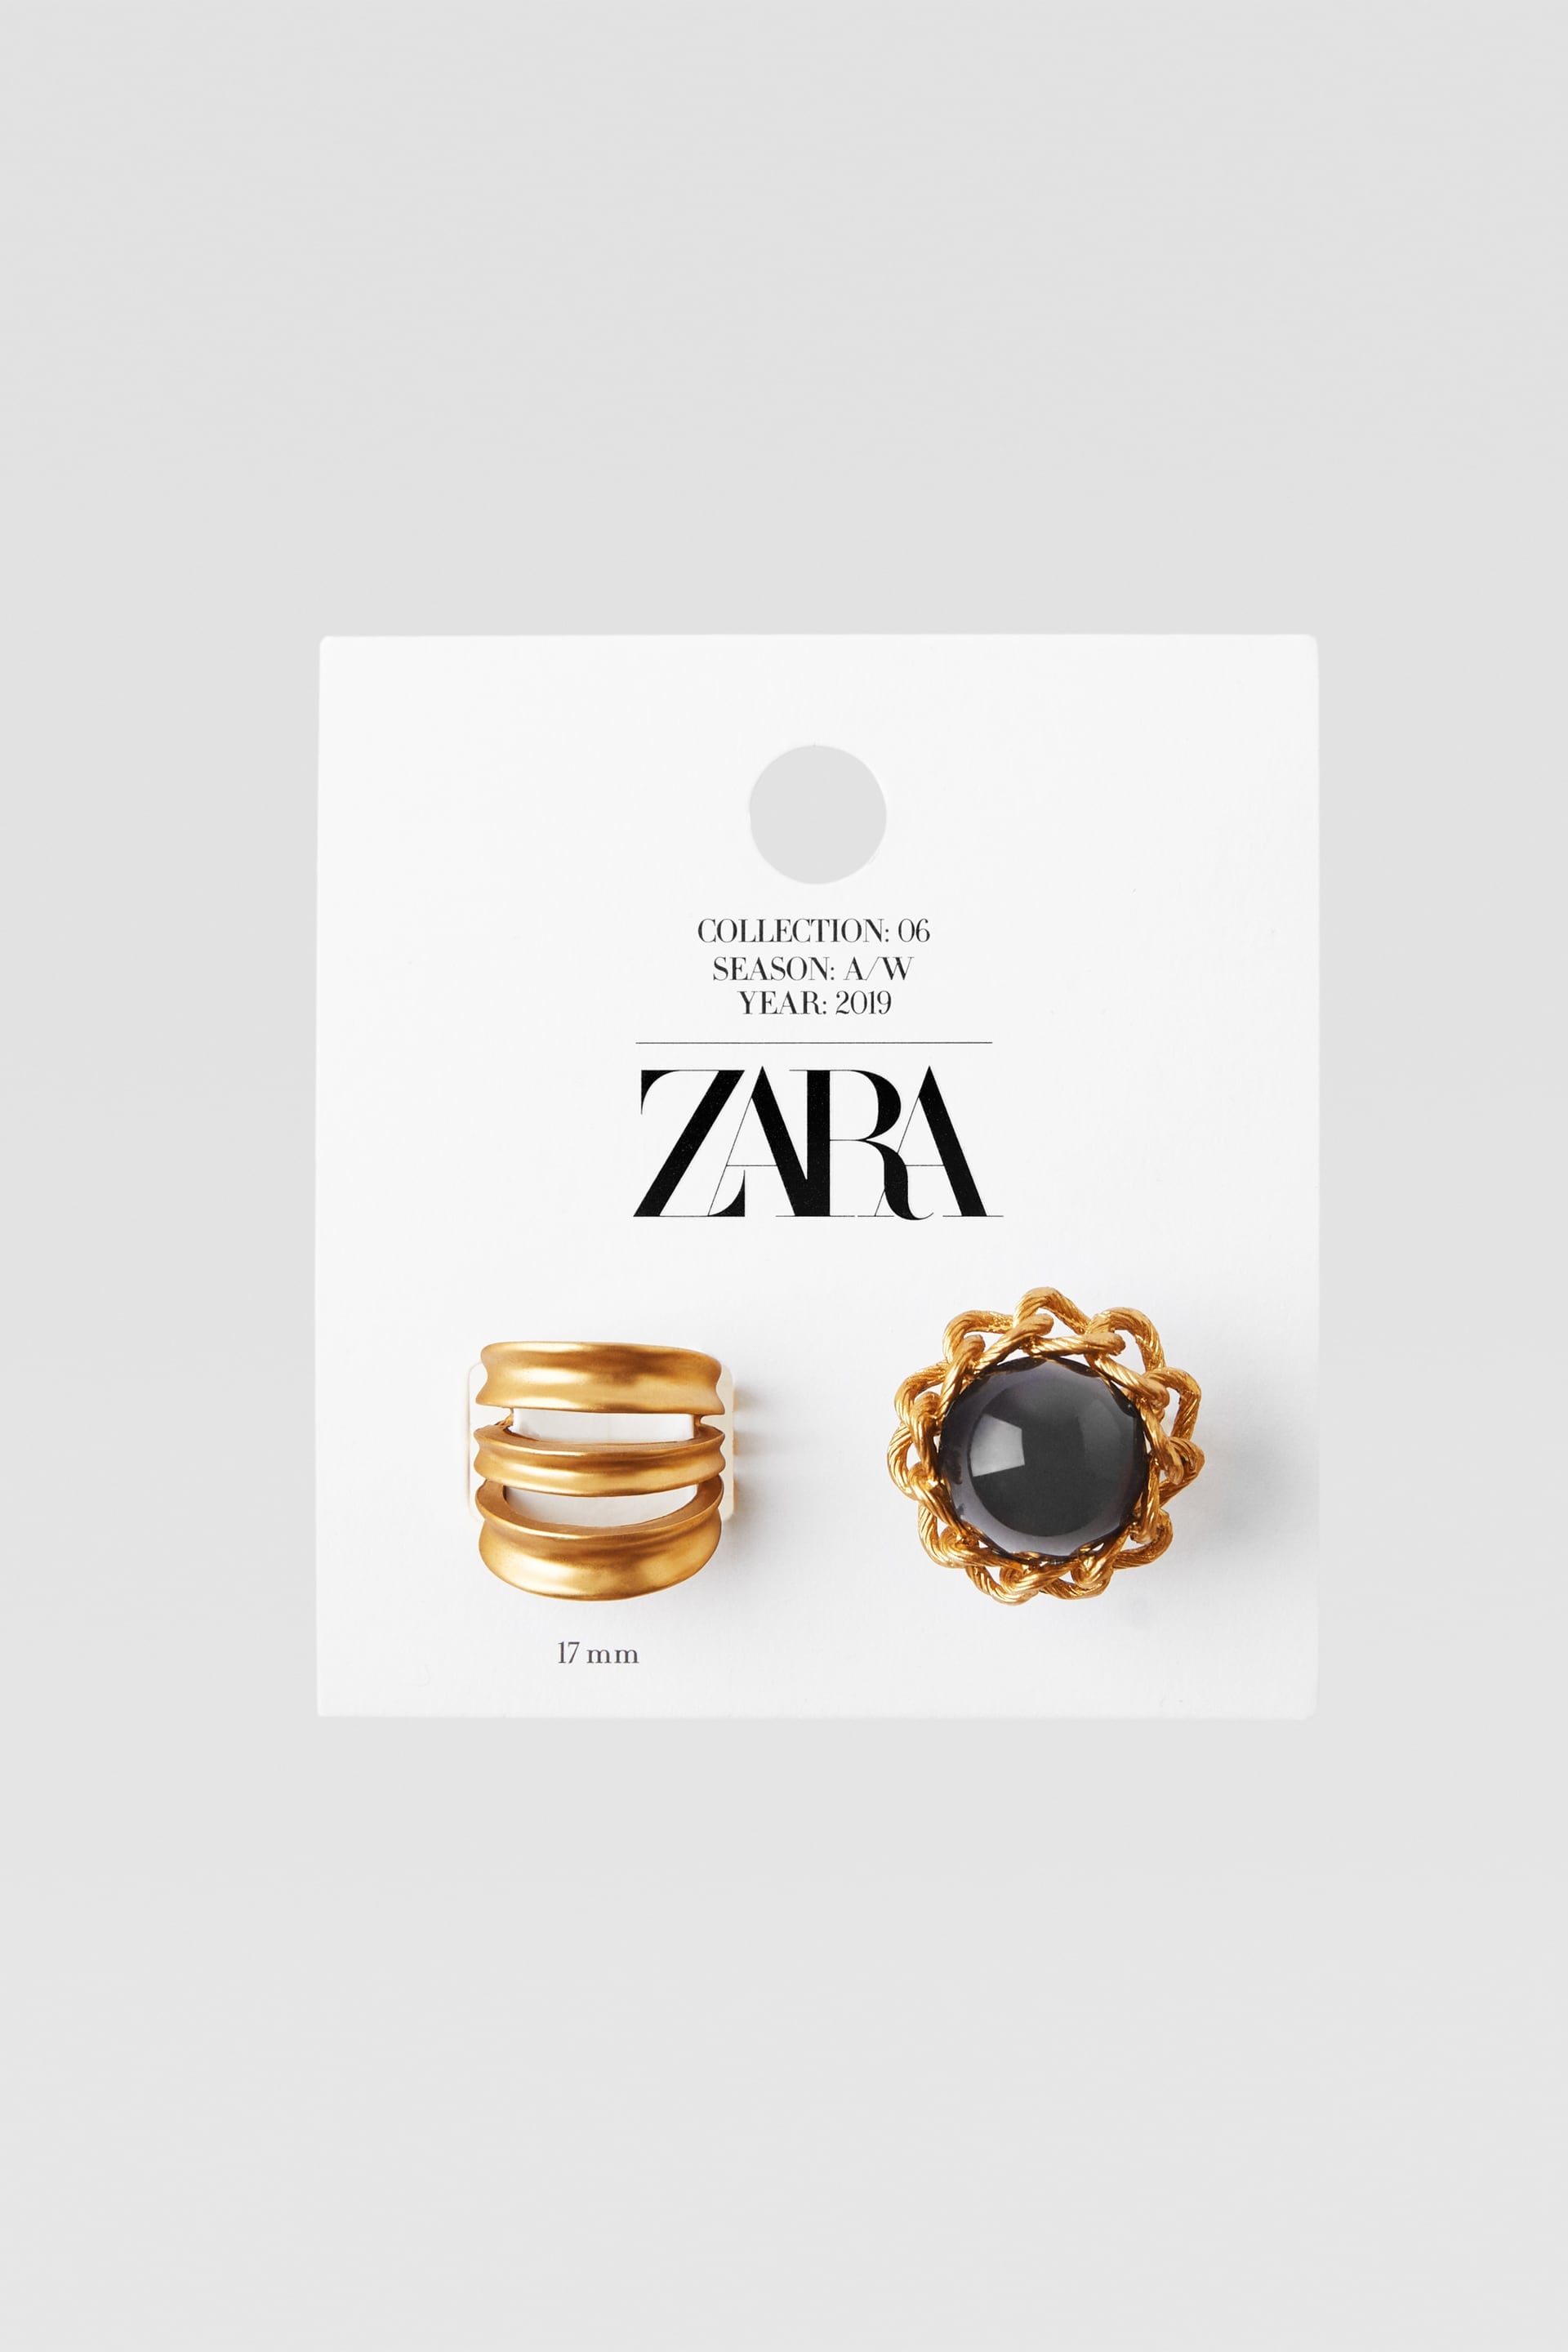 Zara Campaign Collection Pack of Gem Rings | One Editor Visited Zara's Headquarters in Spain, and These Are the Secrets She Learned About the New Collection POPSUGAR Fashion Photo 67